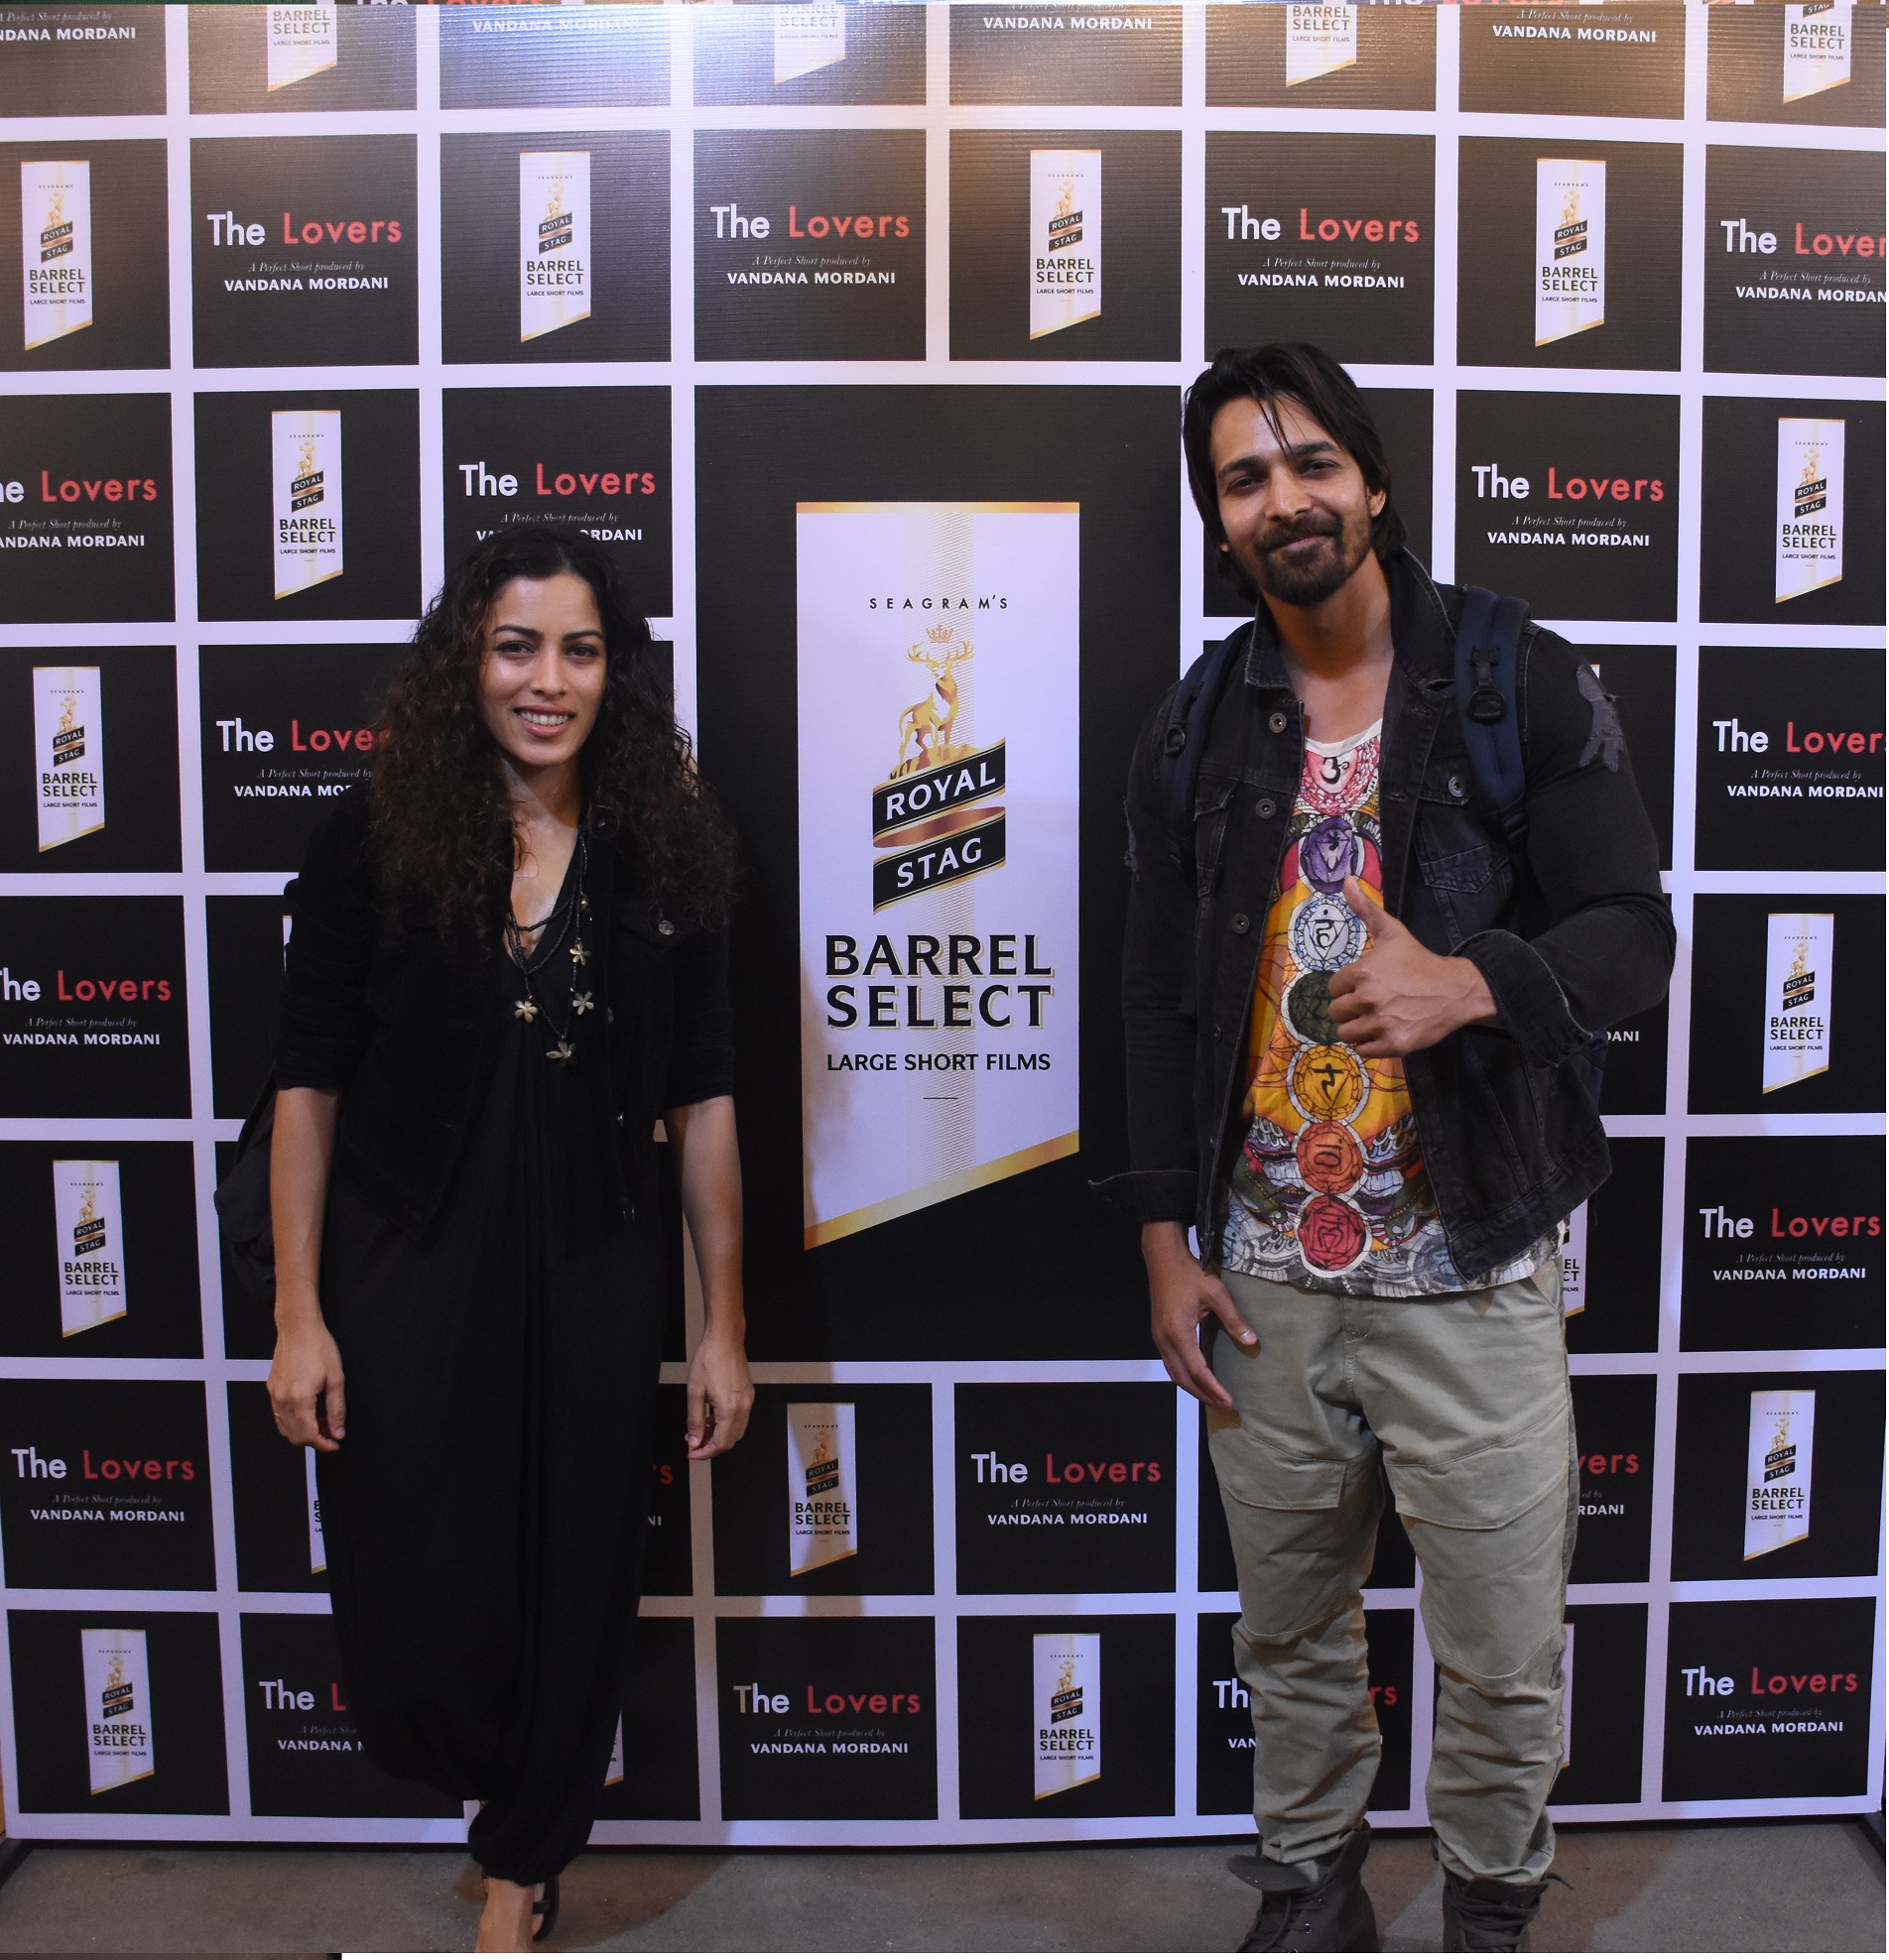 Royal Stag Barrel Select Large short Film premiers The Lovers in Mumbai